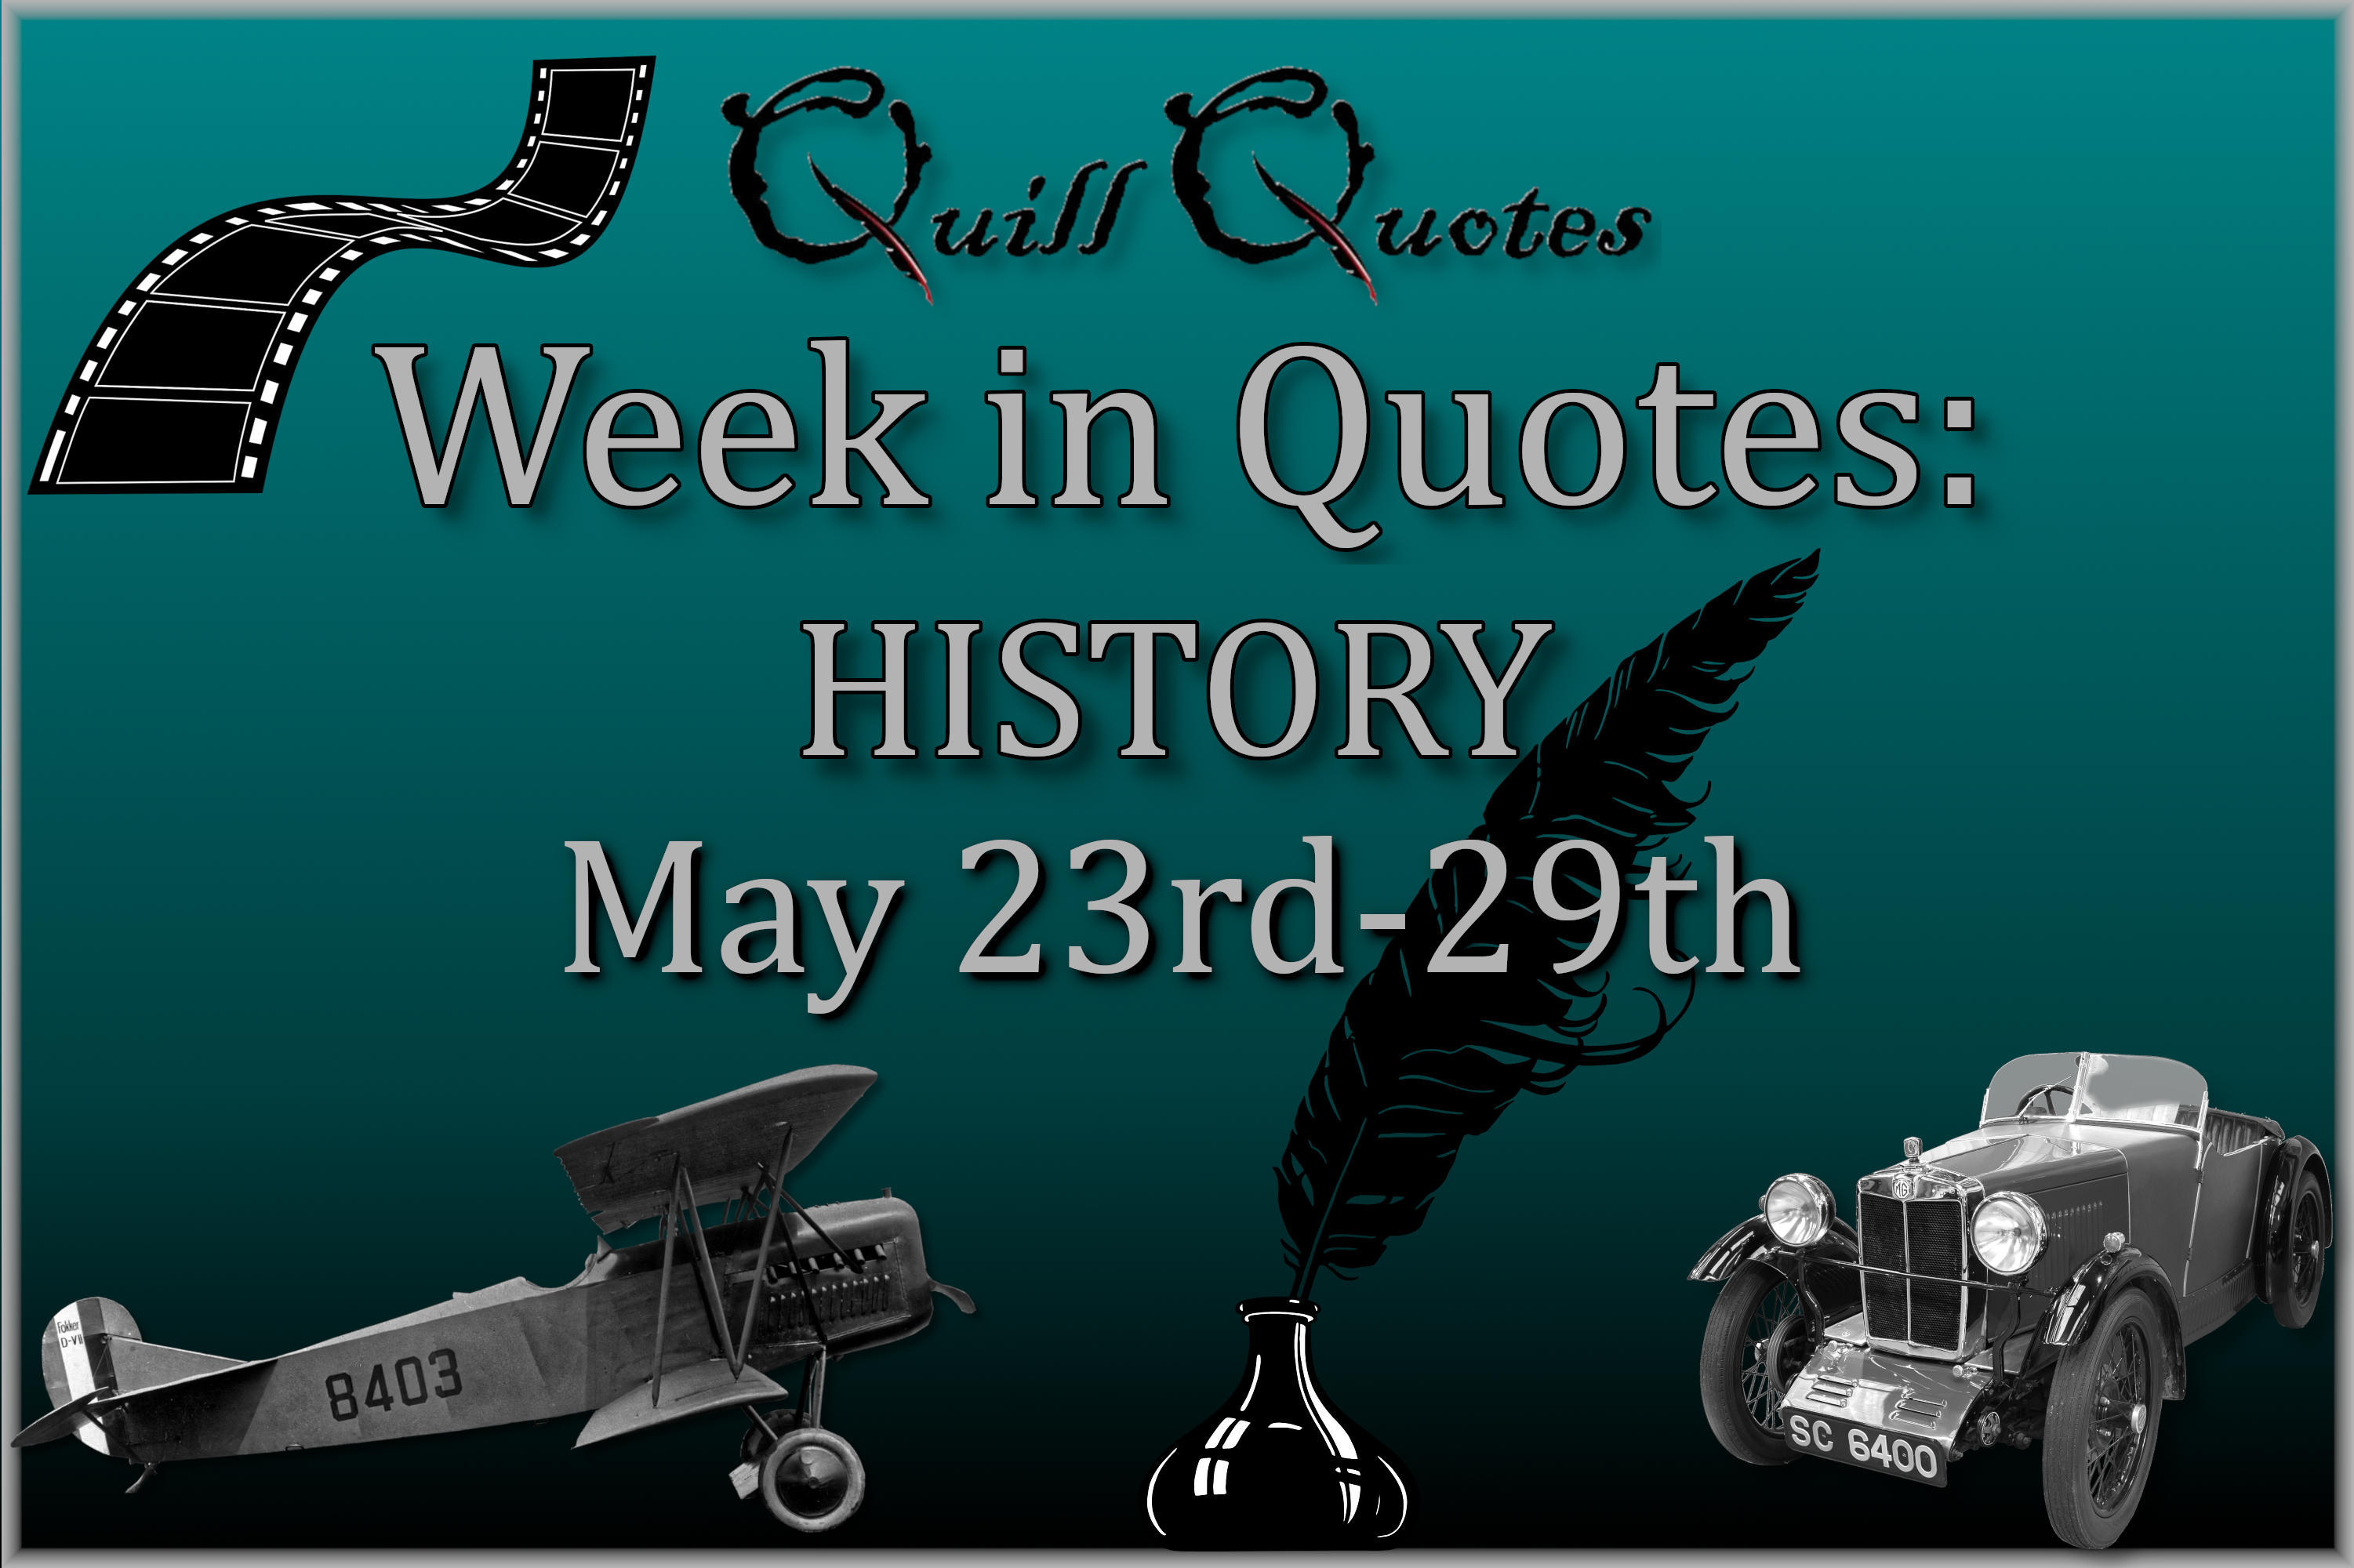 Week in Quotes HISTORY May 23rd-29th